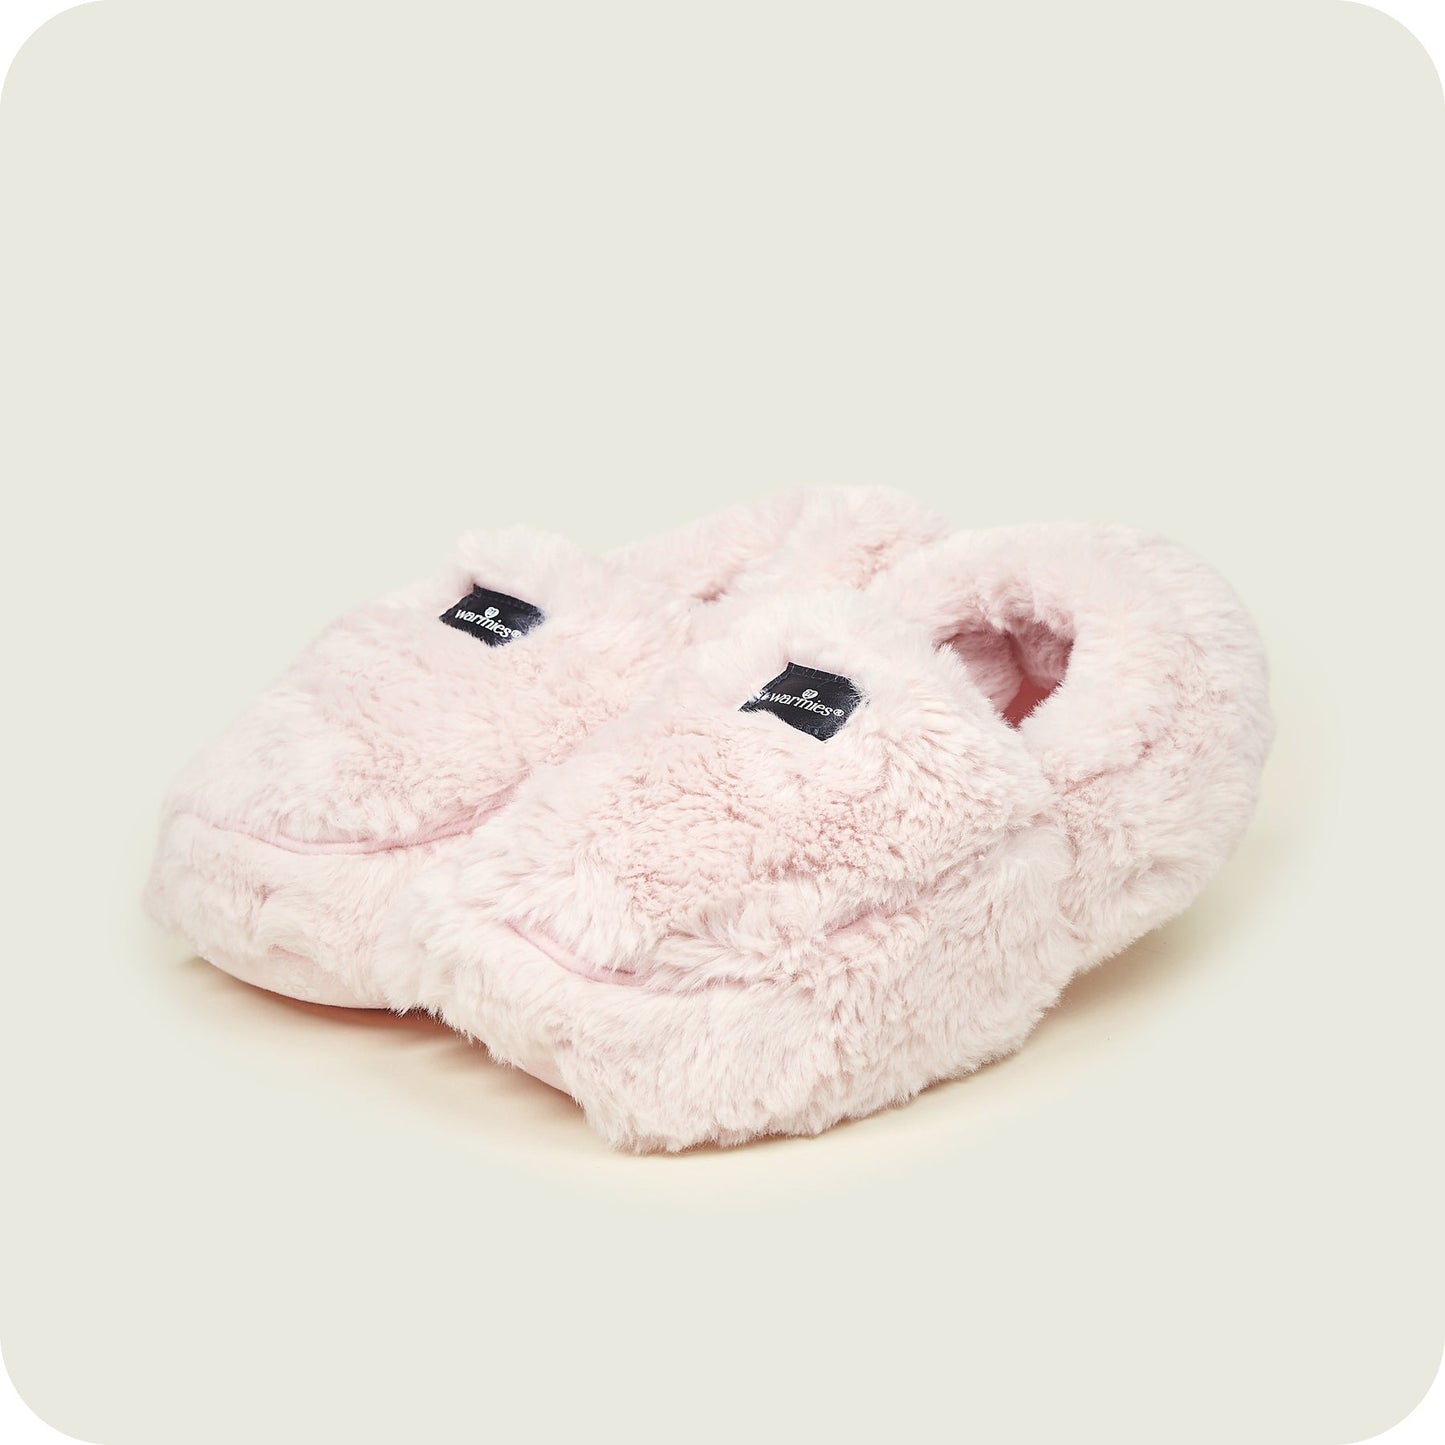 Warmies Luxury Slippers in Box - Pink